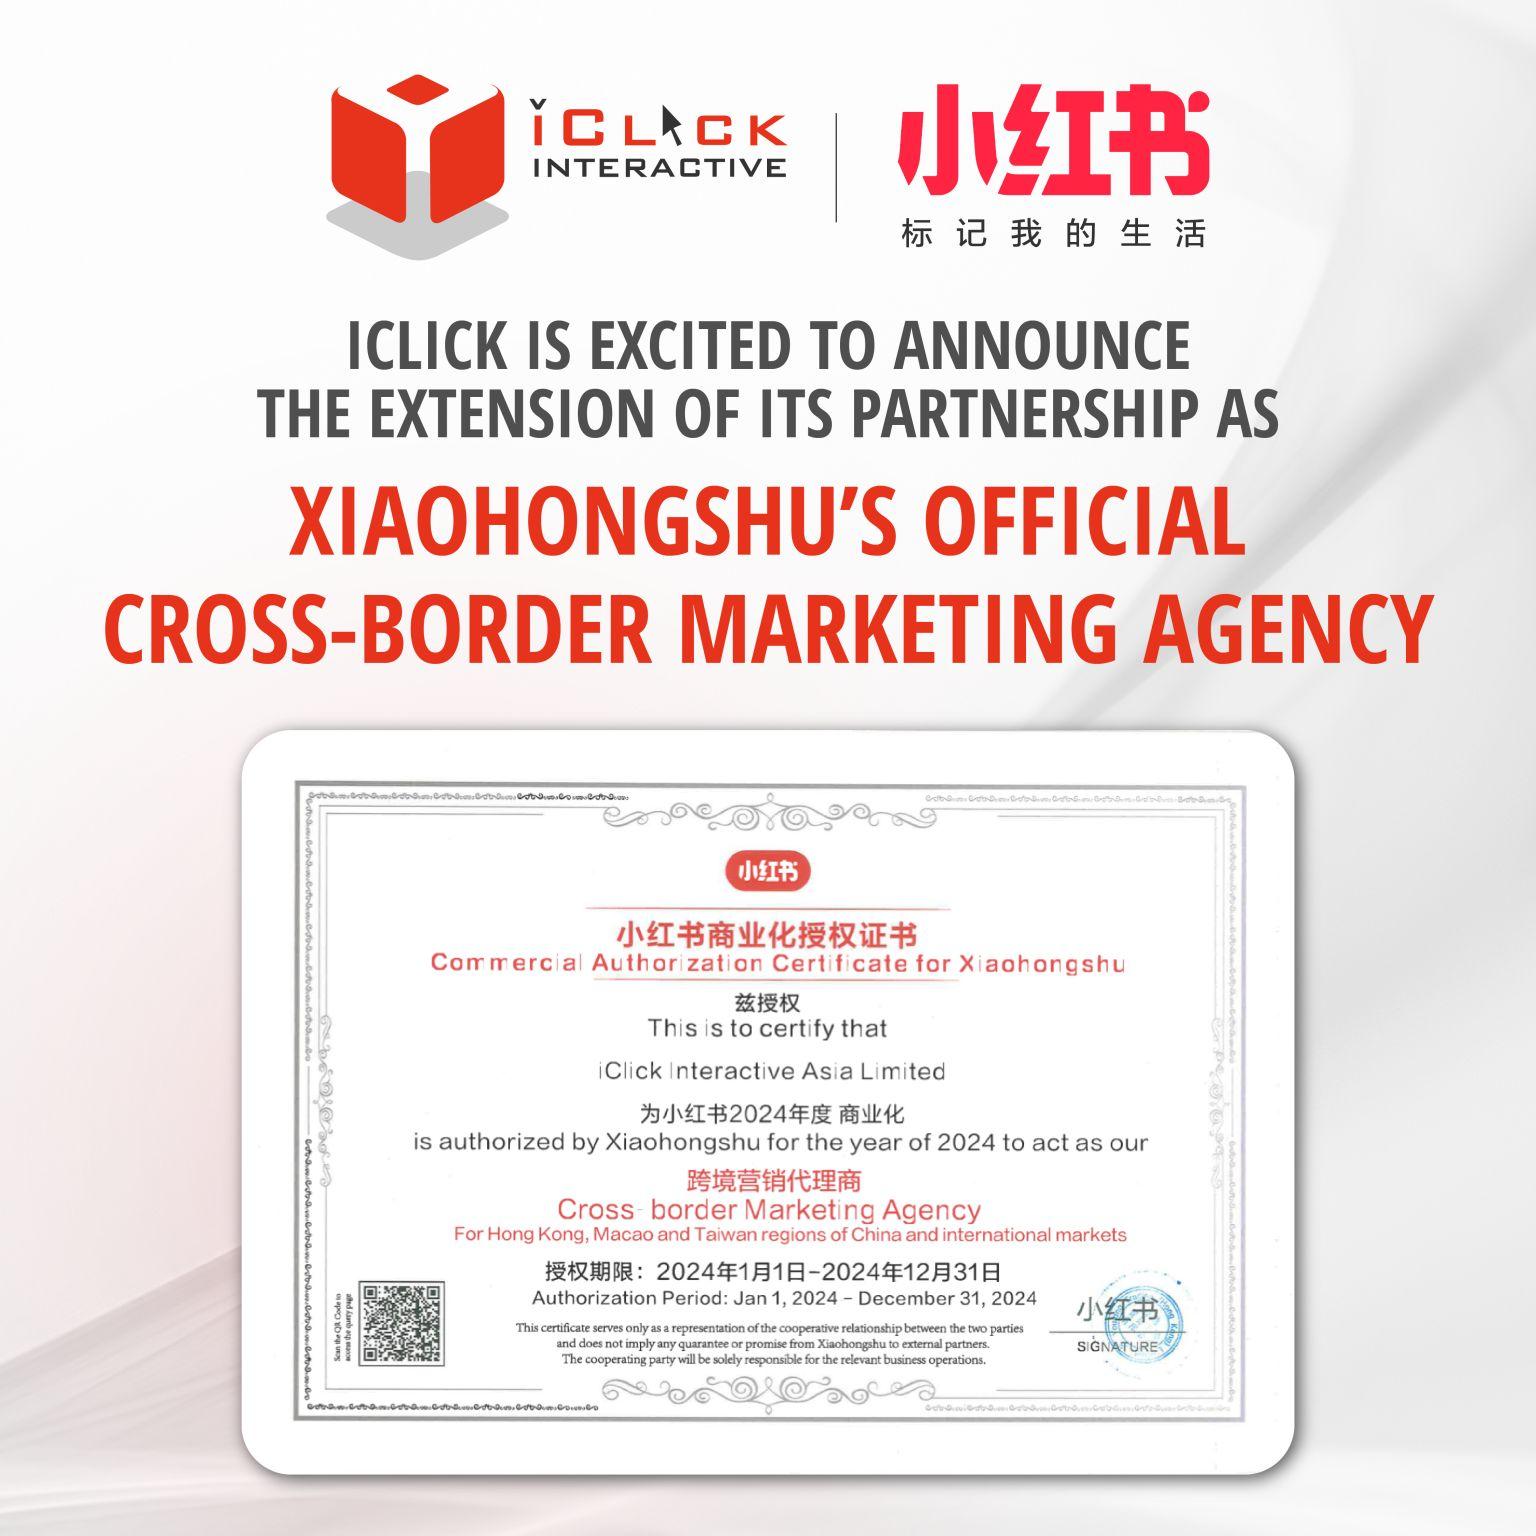 iClick Extends Partnership with Xiaohongshu as Official Cross-Border Marketing Agency